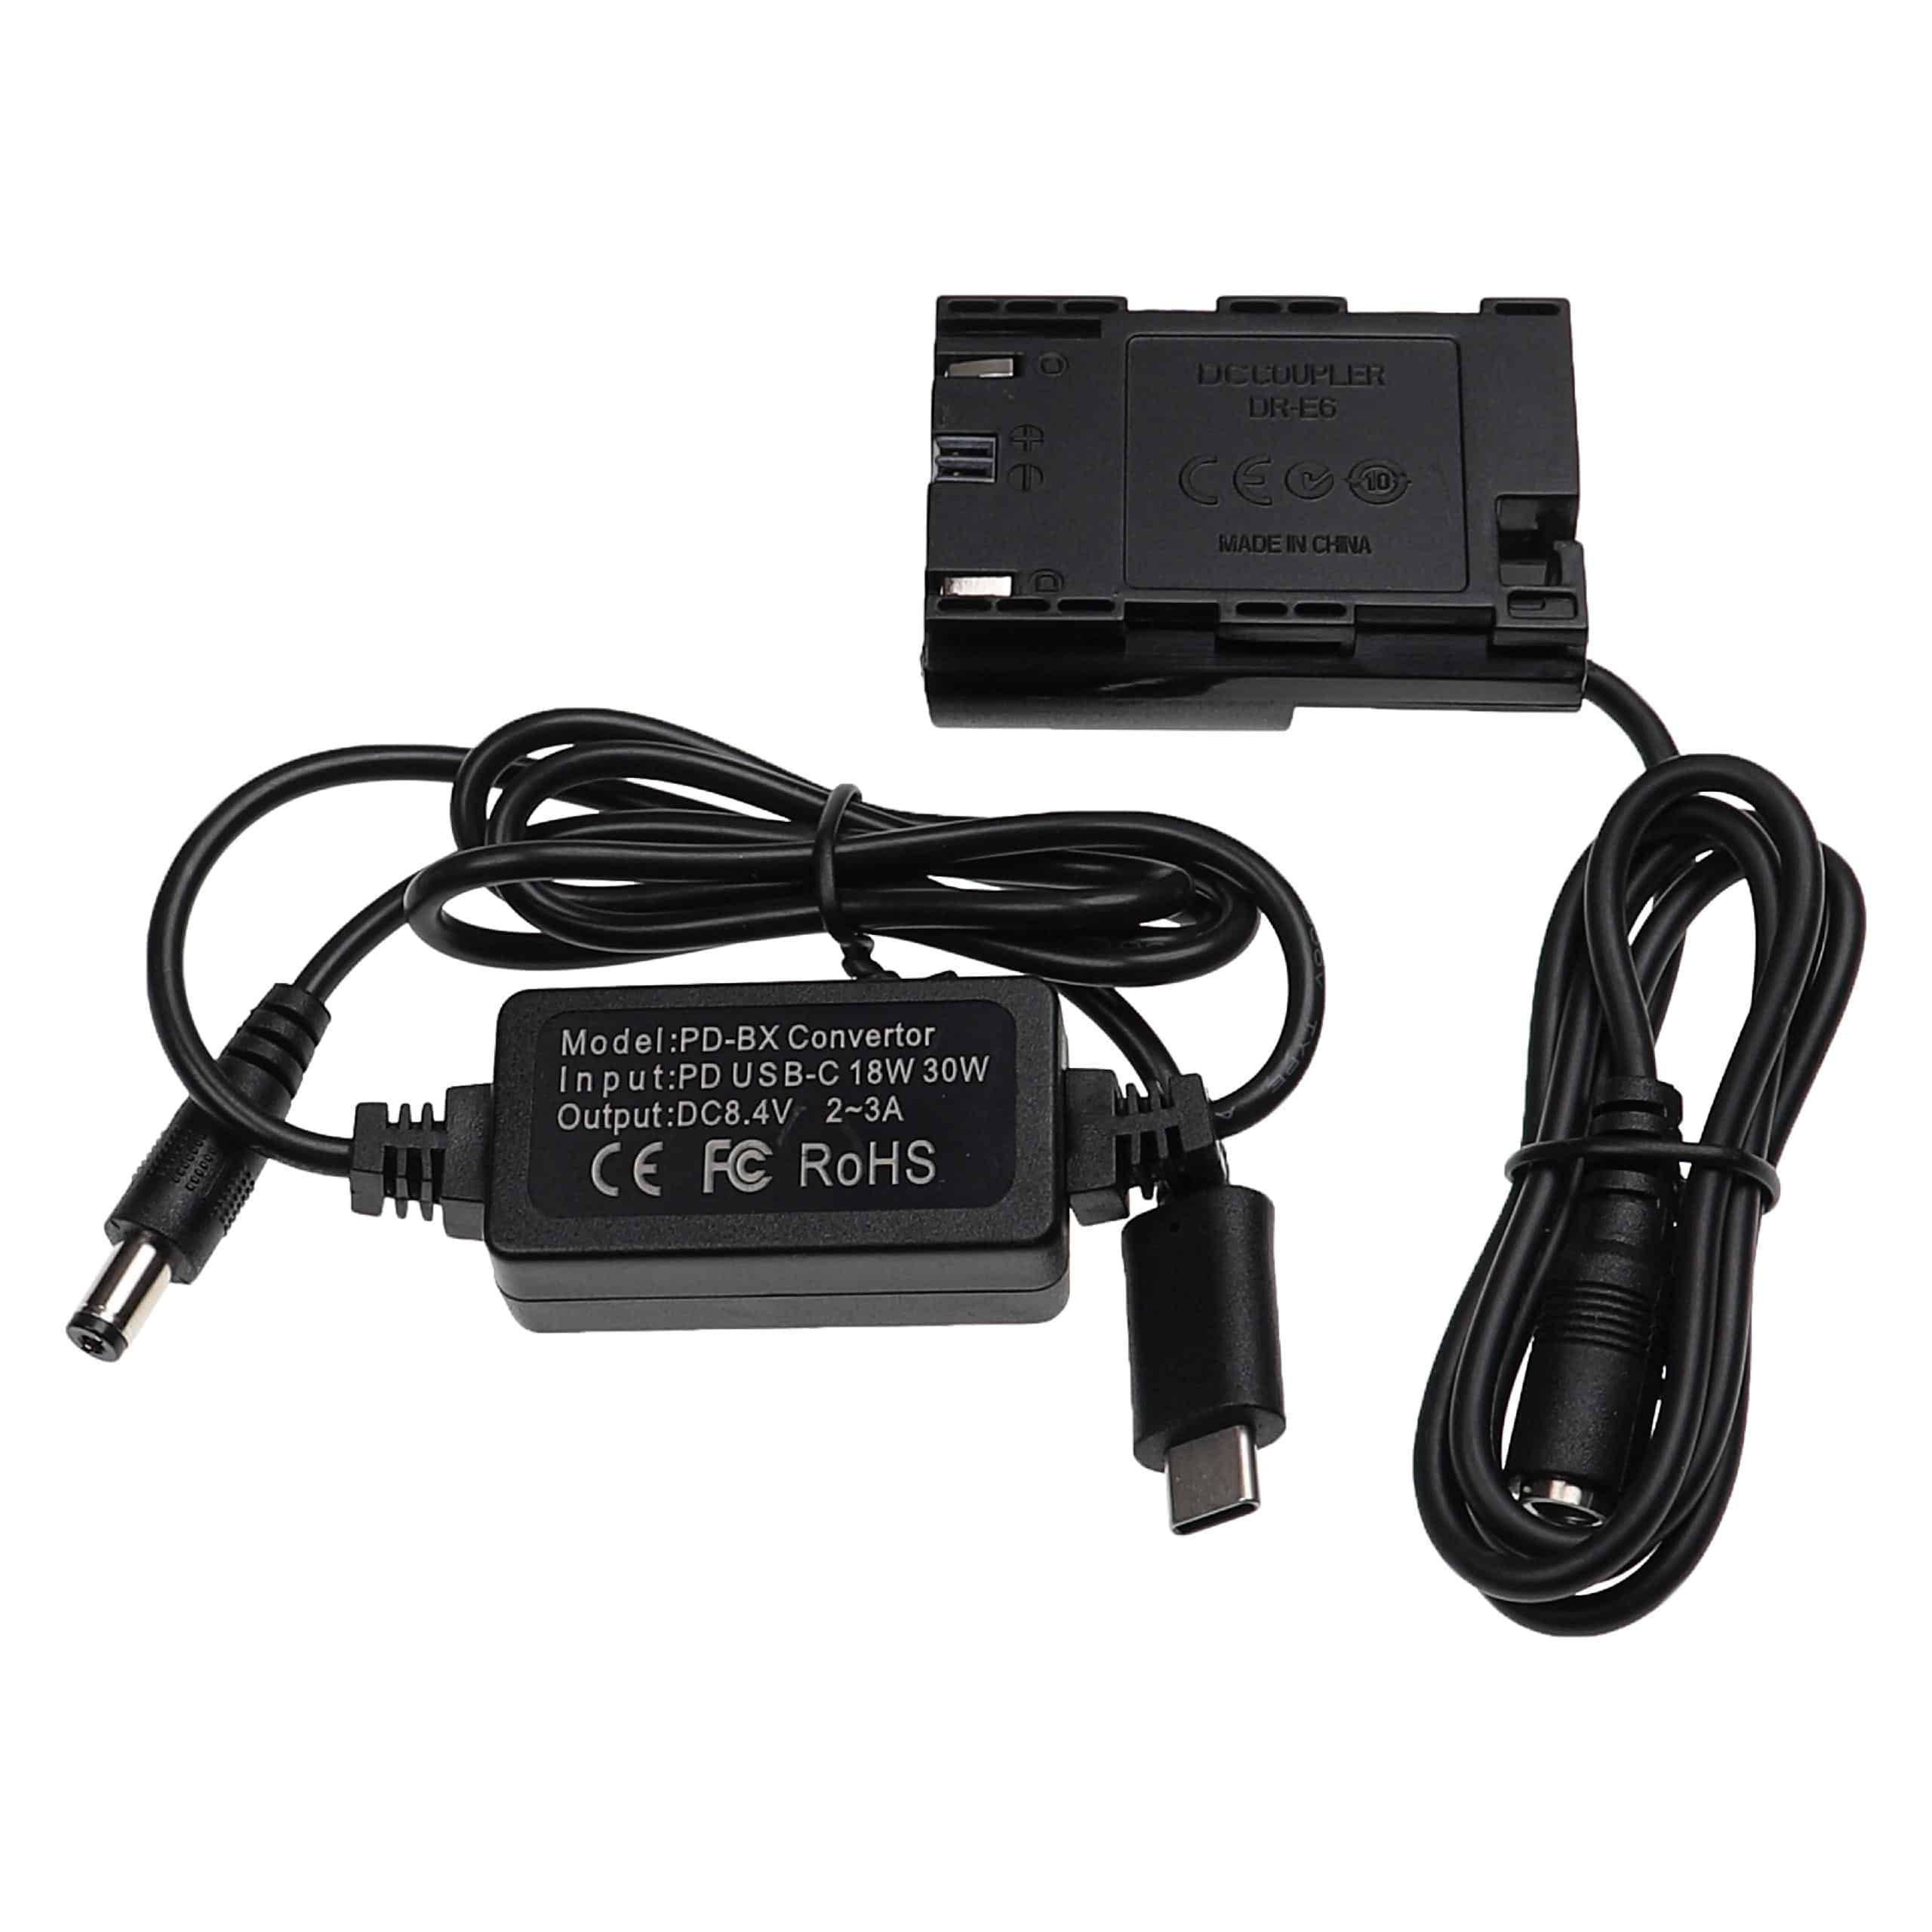 USB Power Supply replaces ACK-E6 for Camera + DC Coupler Normal Decoded as Canon DR-E6 - 2 m, 8.4 V 3.0 A